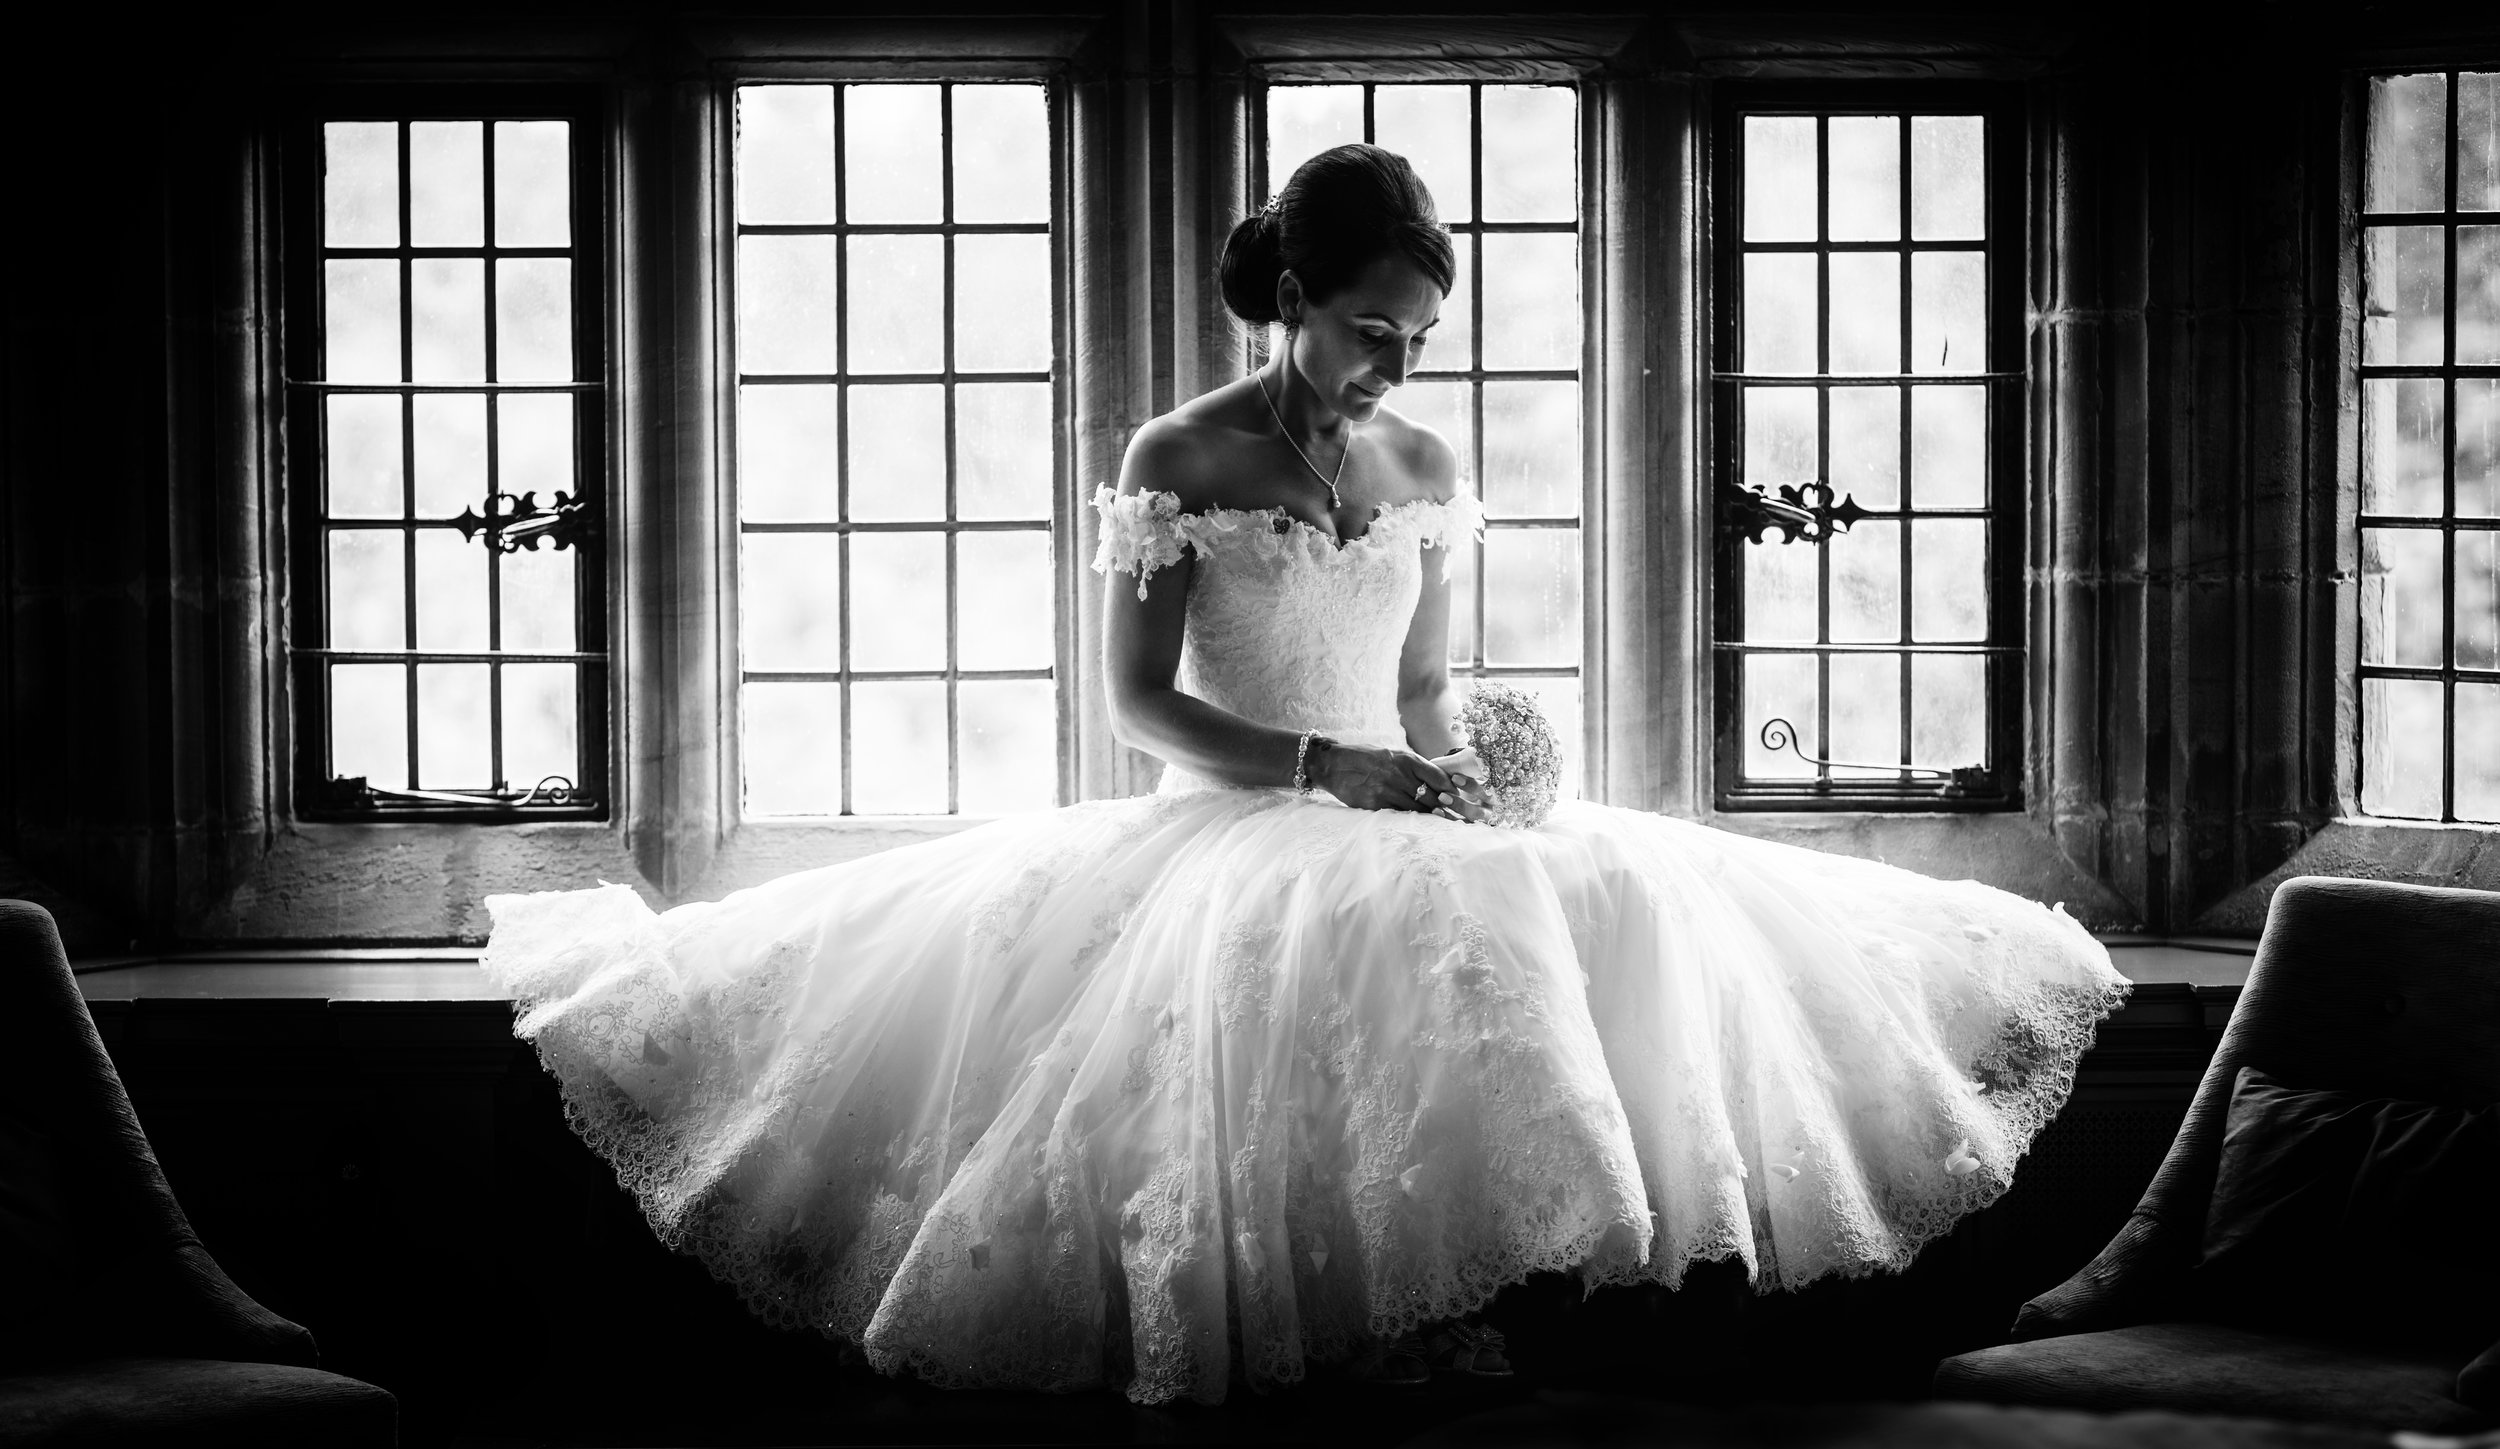 Black and White portrait of a bride sitting in a window seat